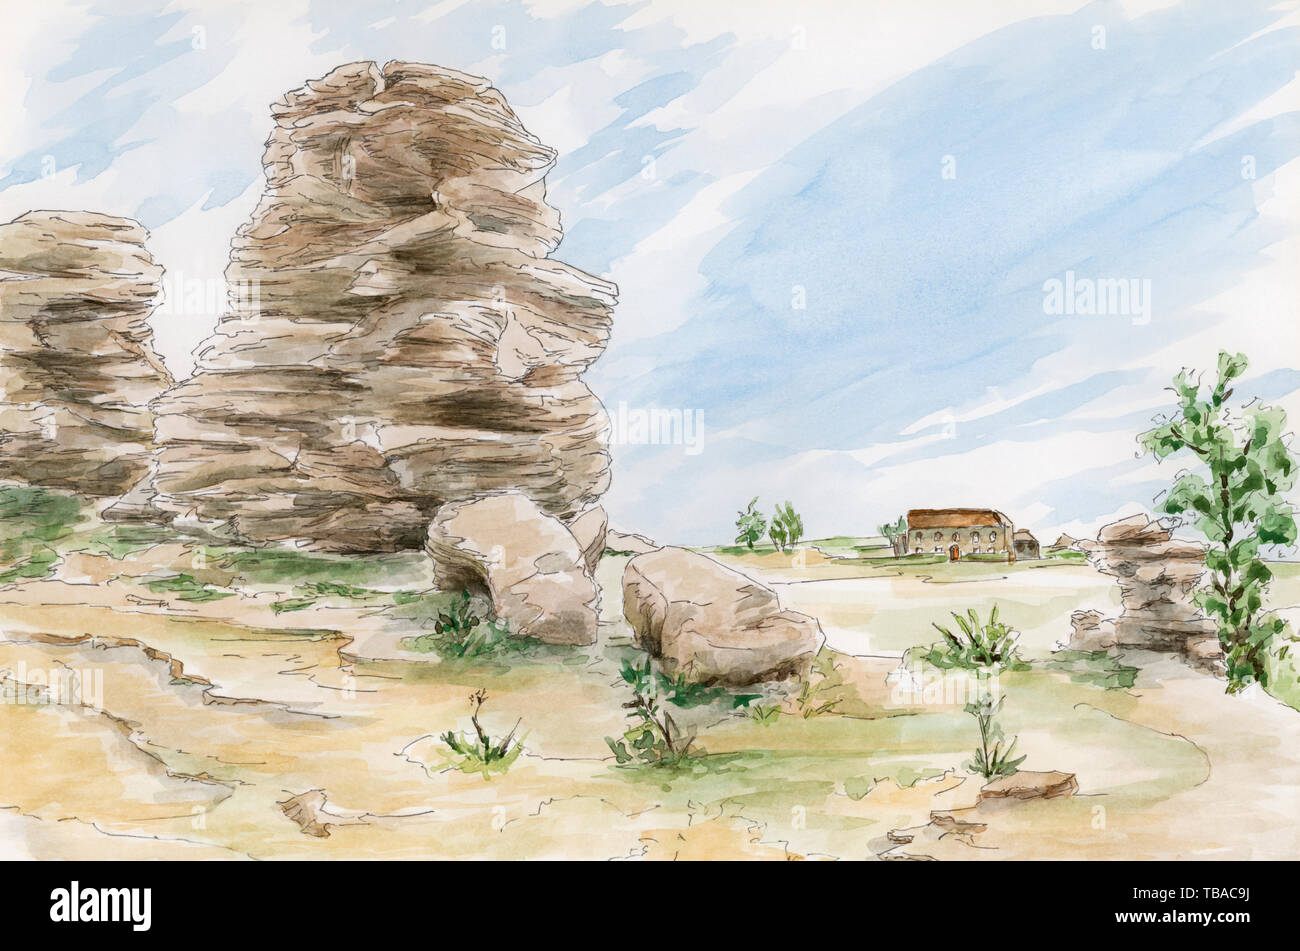 Fantasy rocks formations. Yorkshire, UK. Pencil and watercolor on paper. Stock Photo